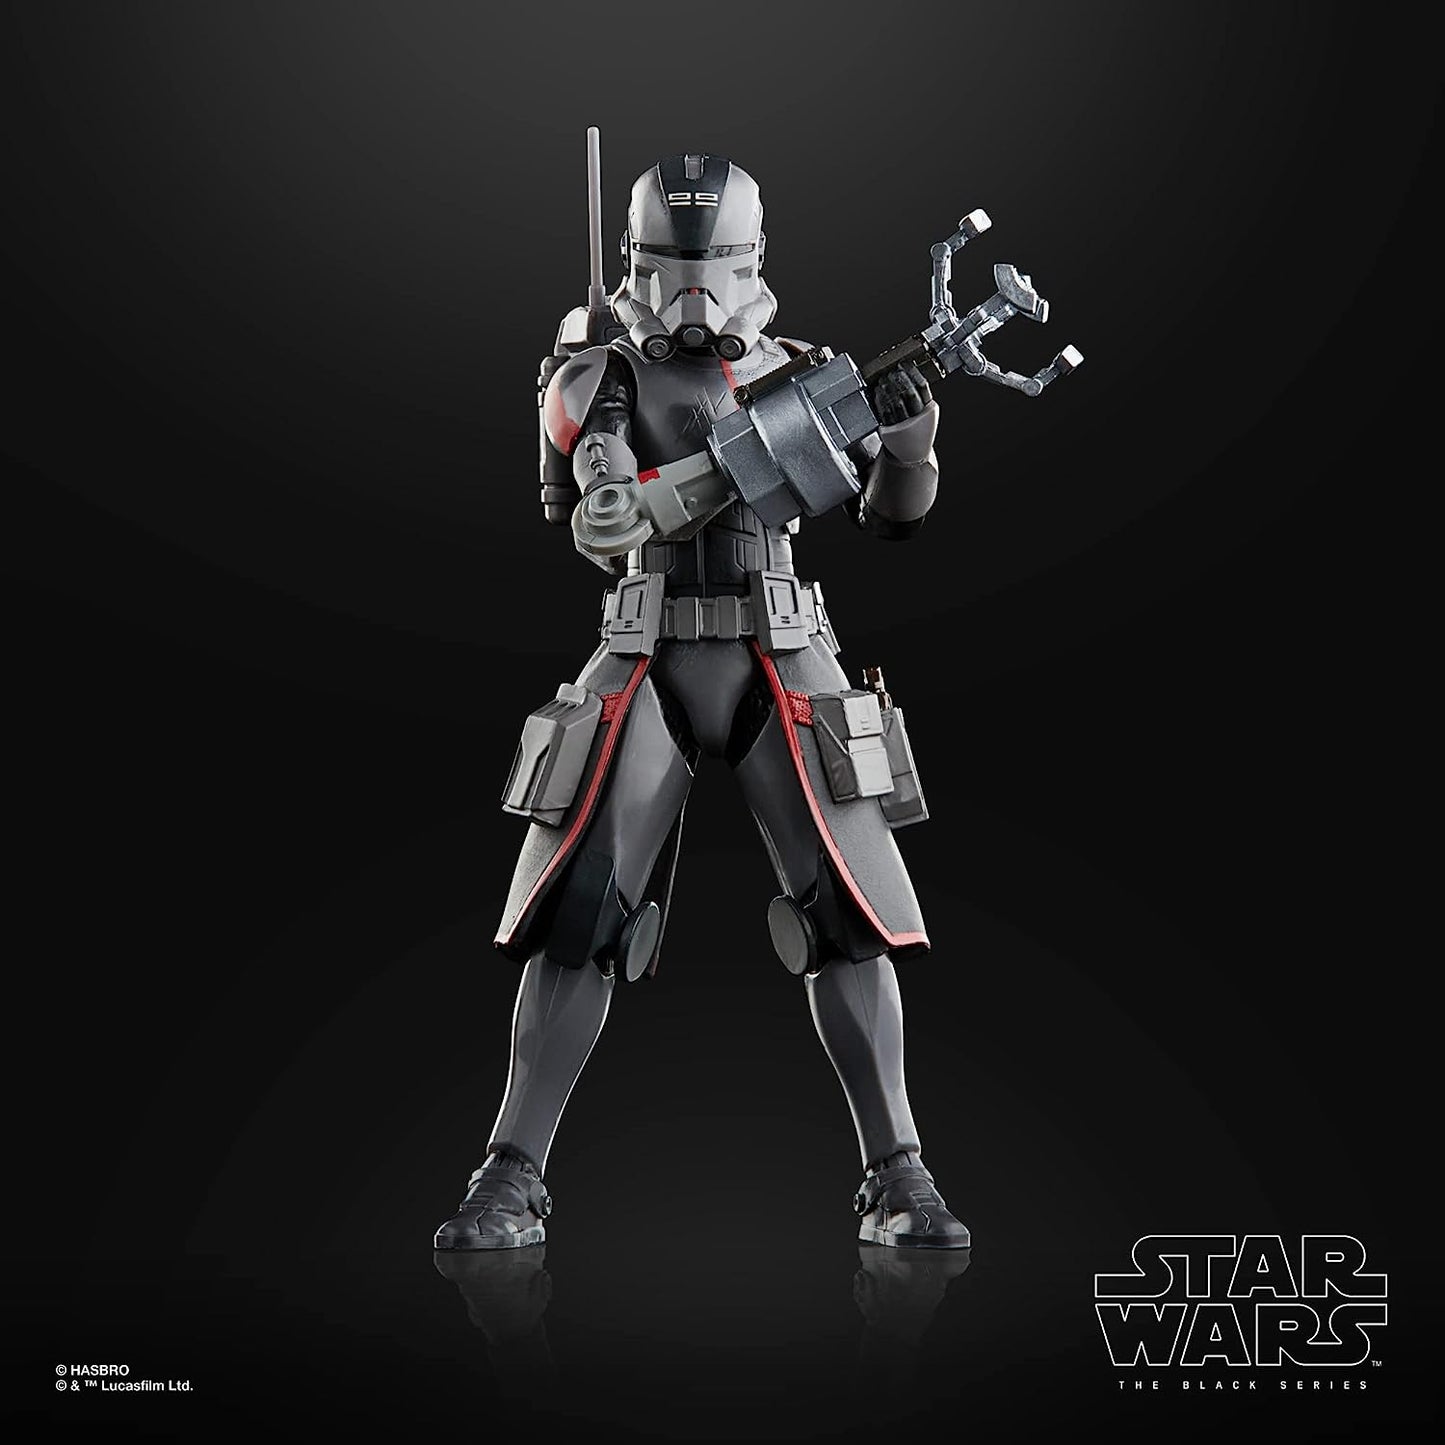 STAR WARS The Black Series Echo Toy 6-Inch-Scale The Bad Batch Collectible Action Figure and Accessory